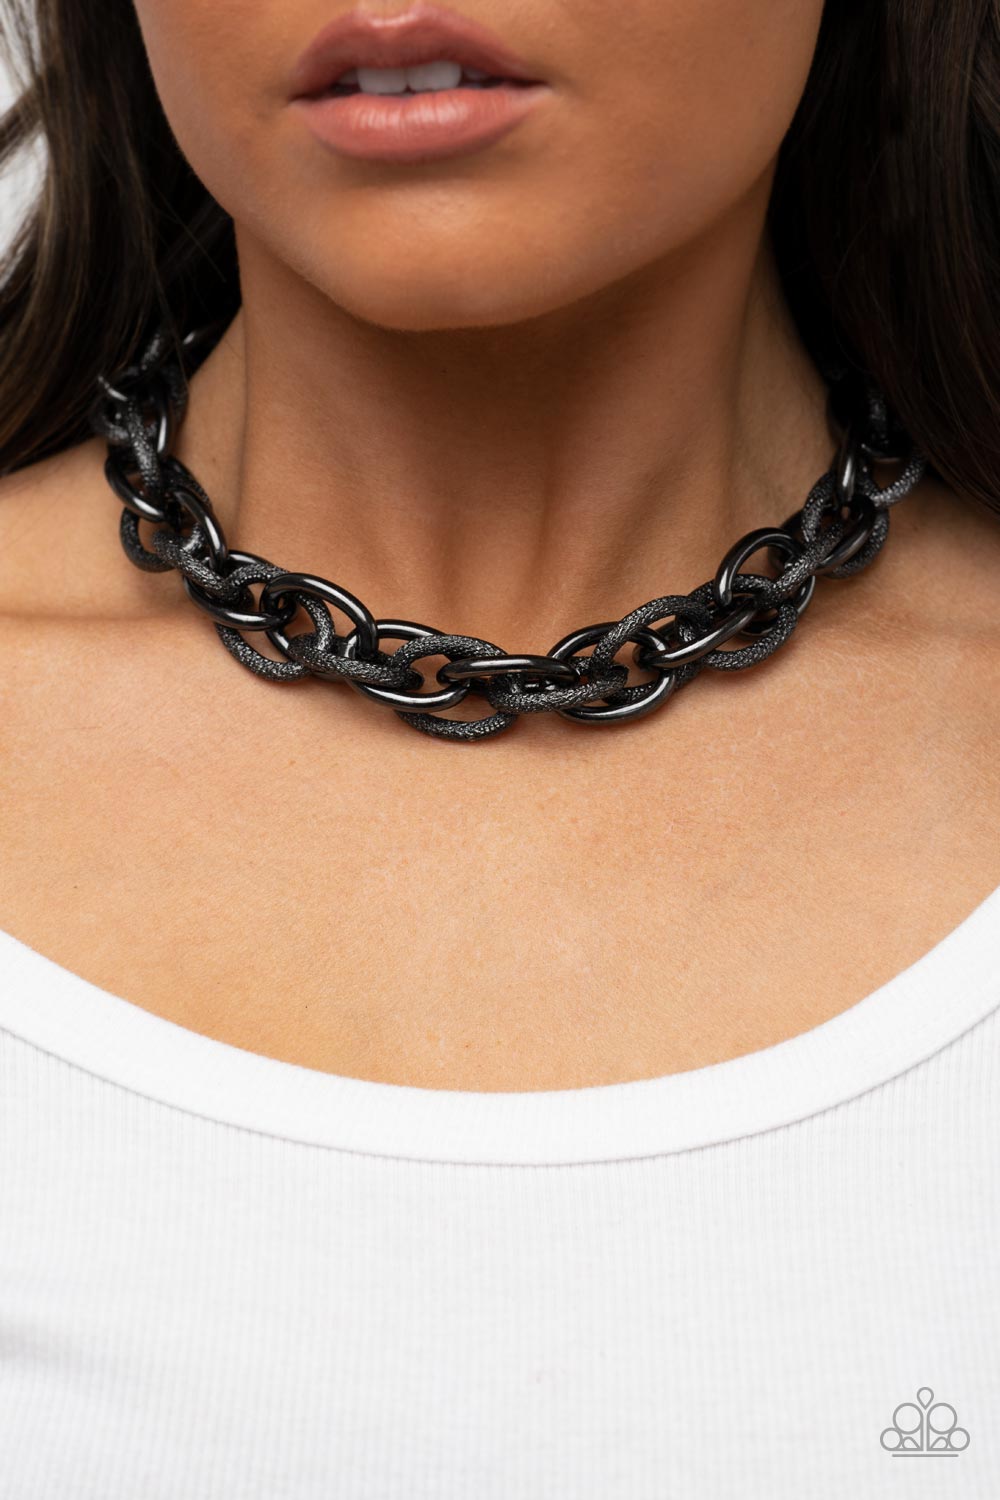 License to Chill Gunmetal Black Chain Necklace - Paparazzi Accessories- lightbox - CarasShop.com - $5 Jewelry by Cara Jewels